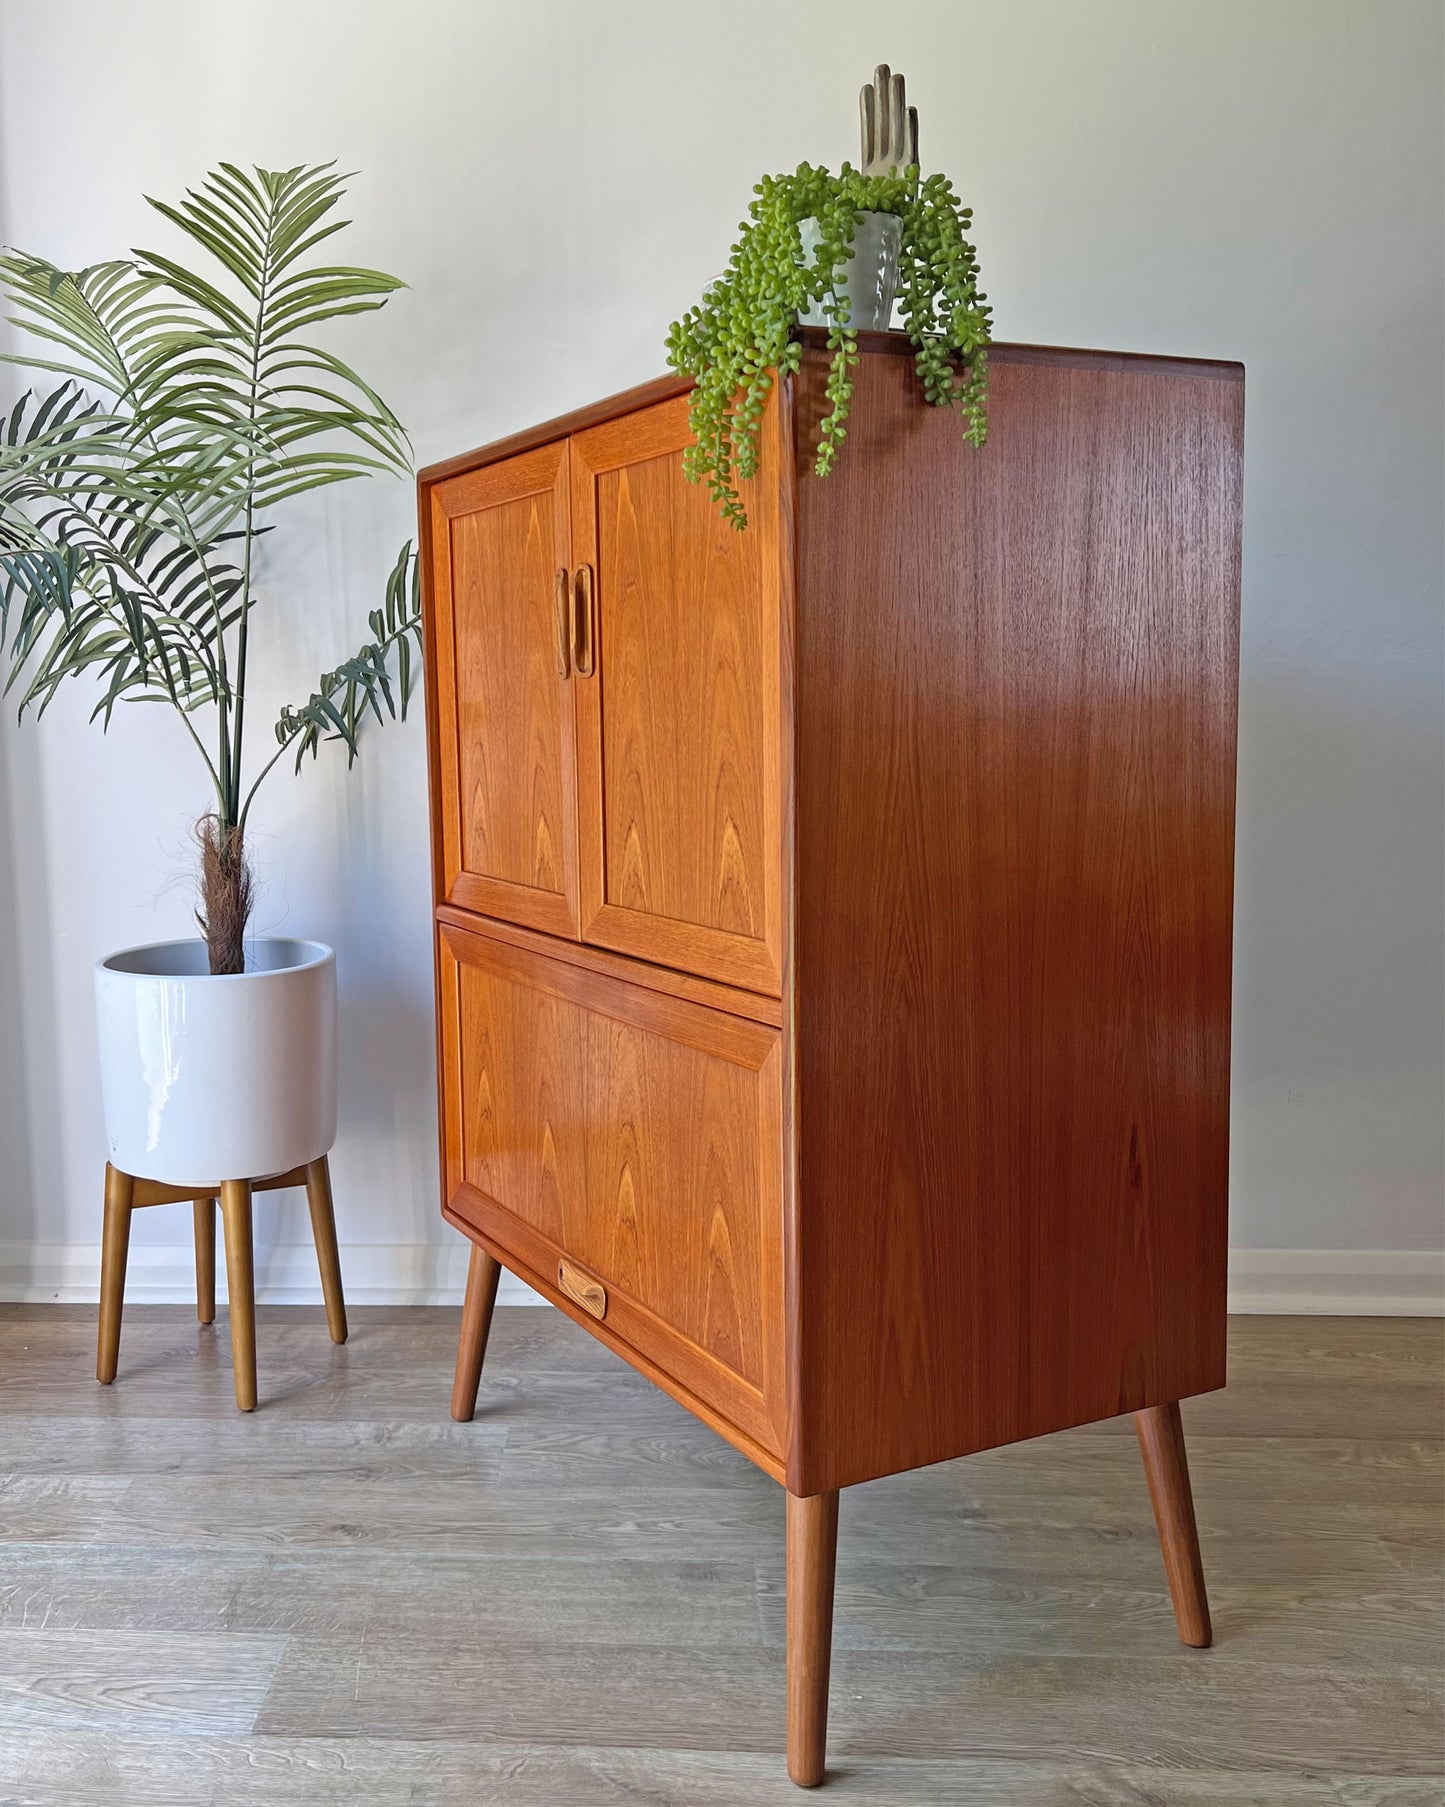 Vintage Mid Century G Plan Fresco Drinks Cocktail Cabinet on Wooden Legs - Tropical Palms